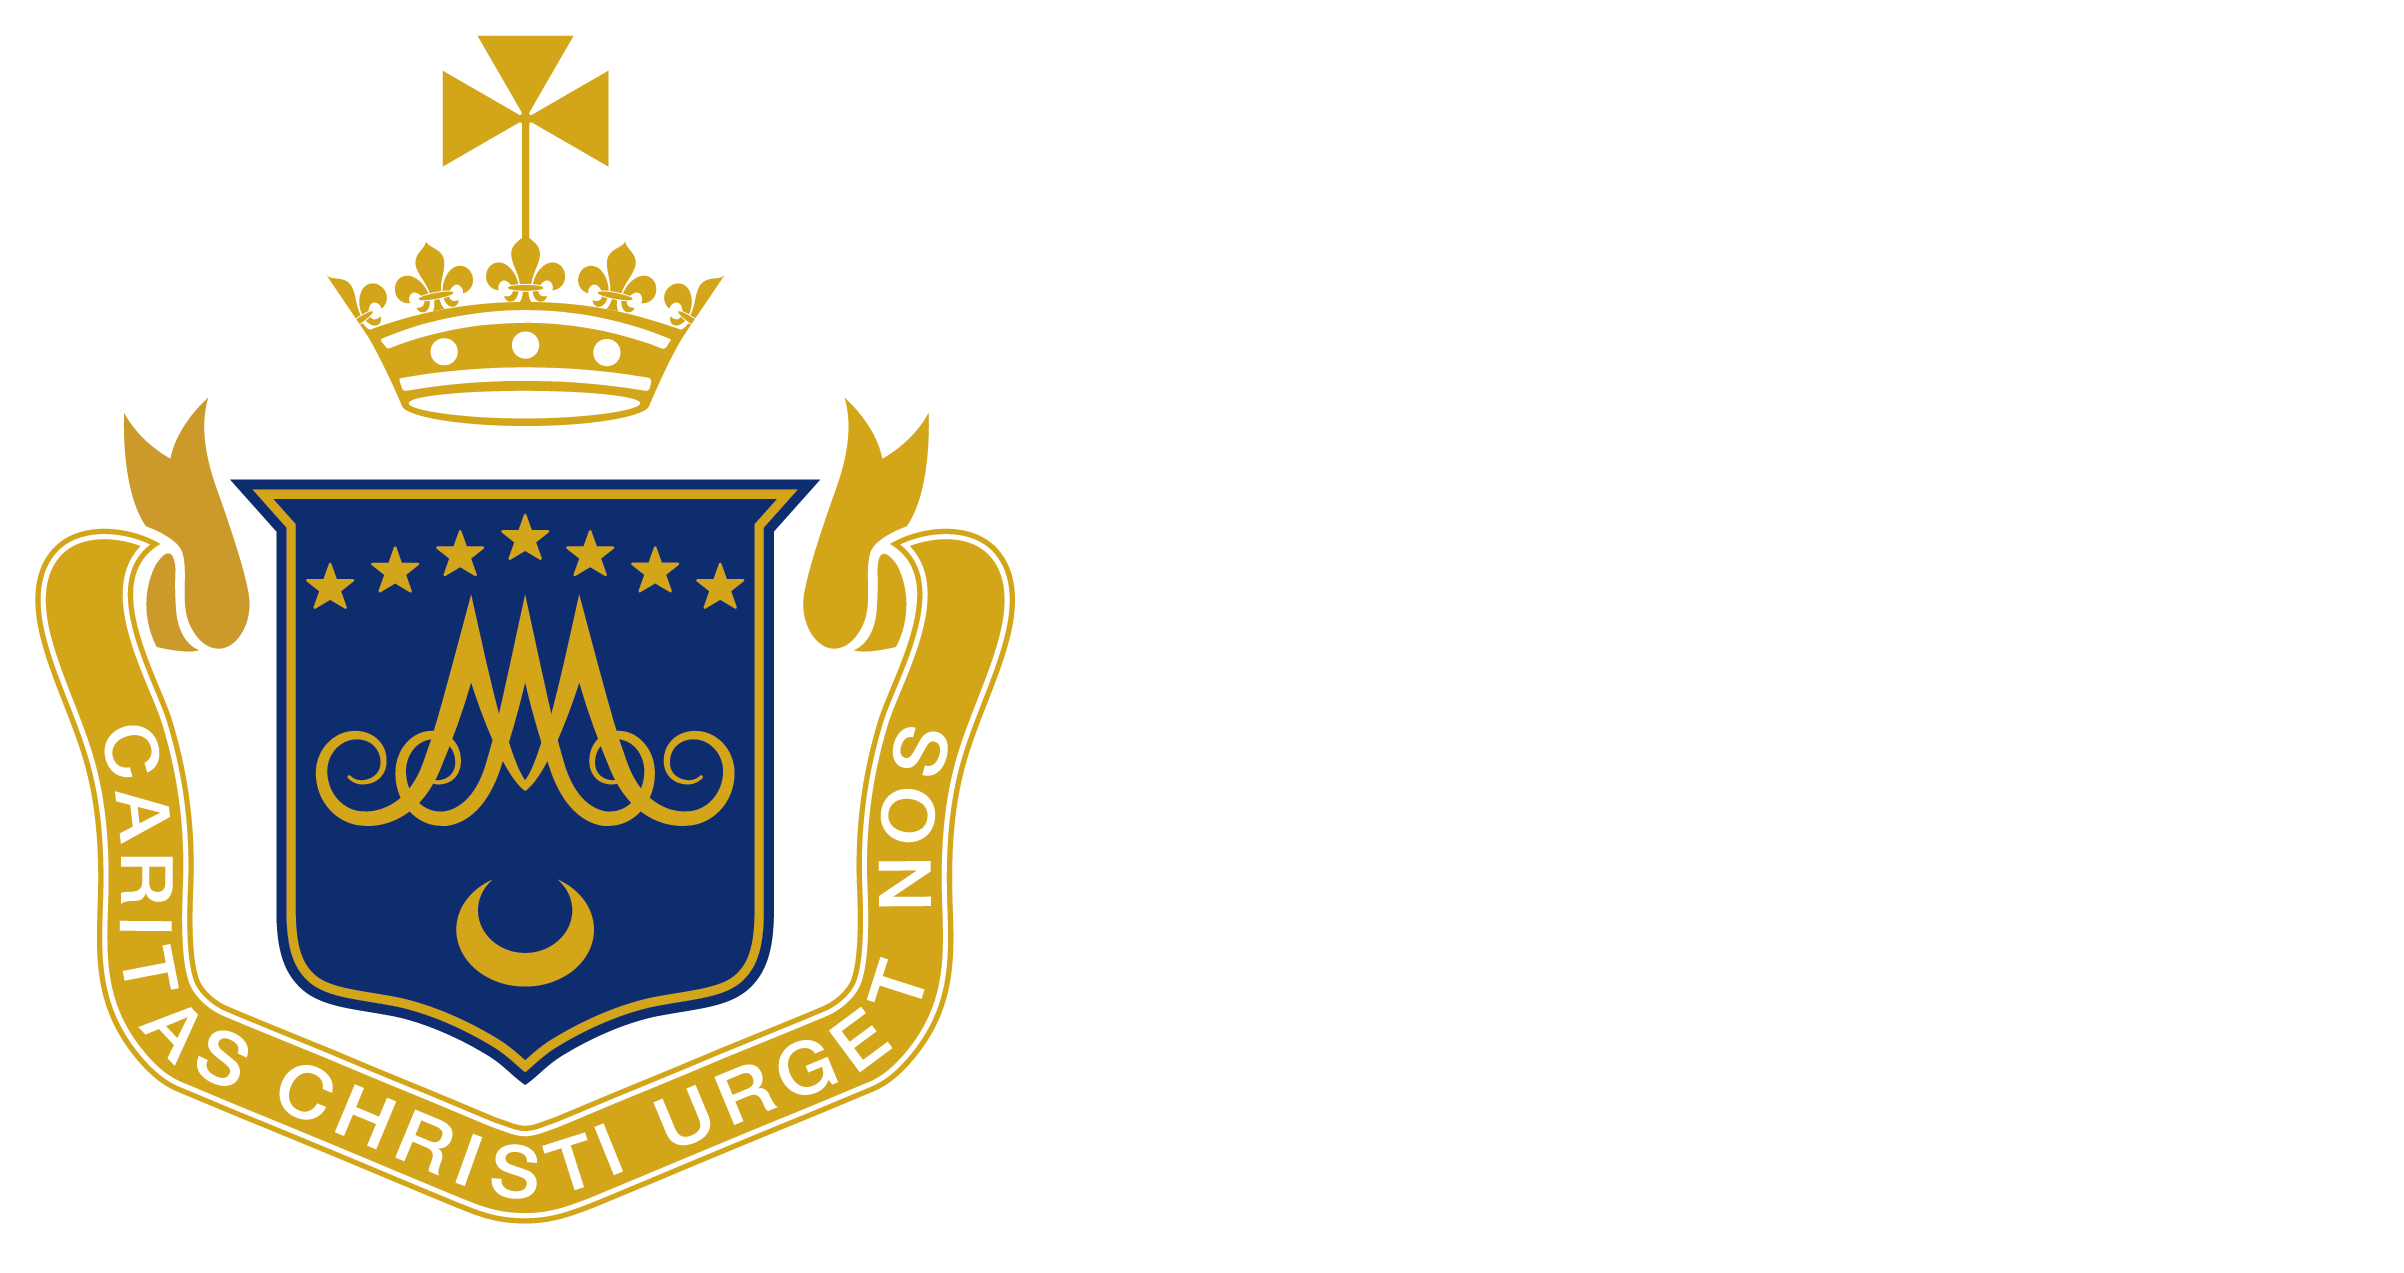 Religious Sisters of Charity